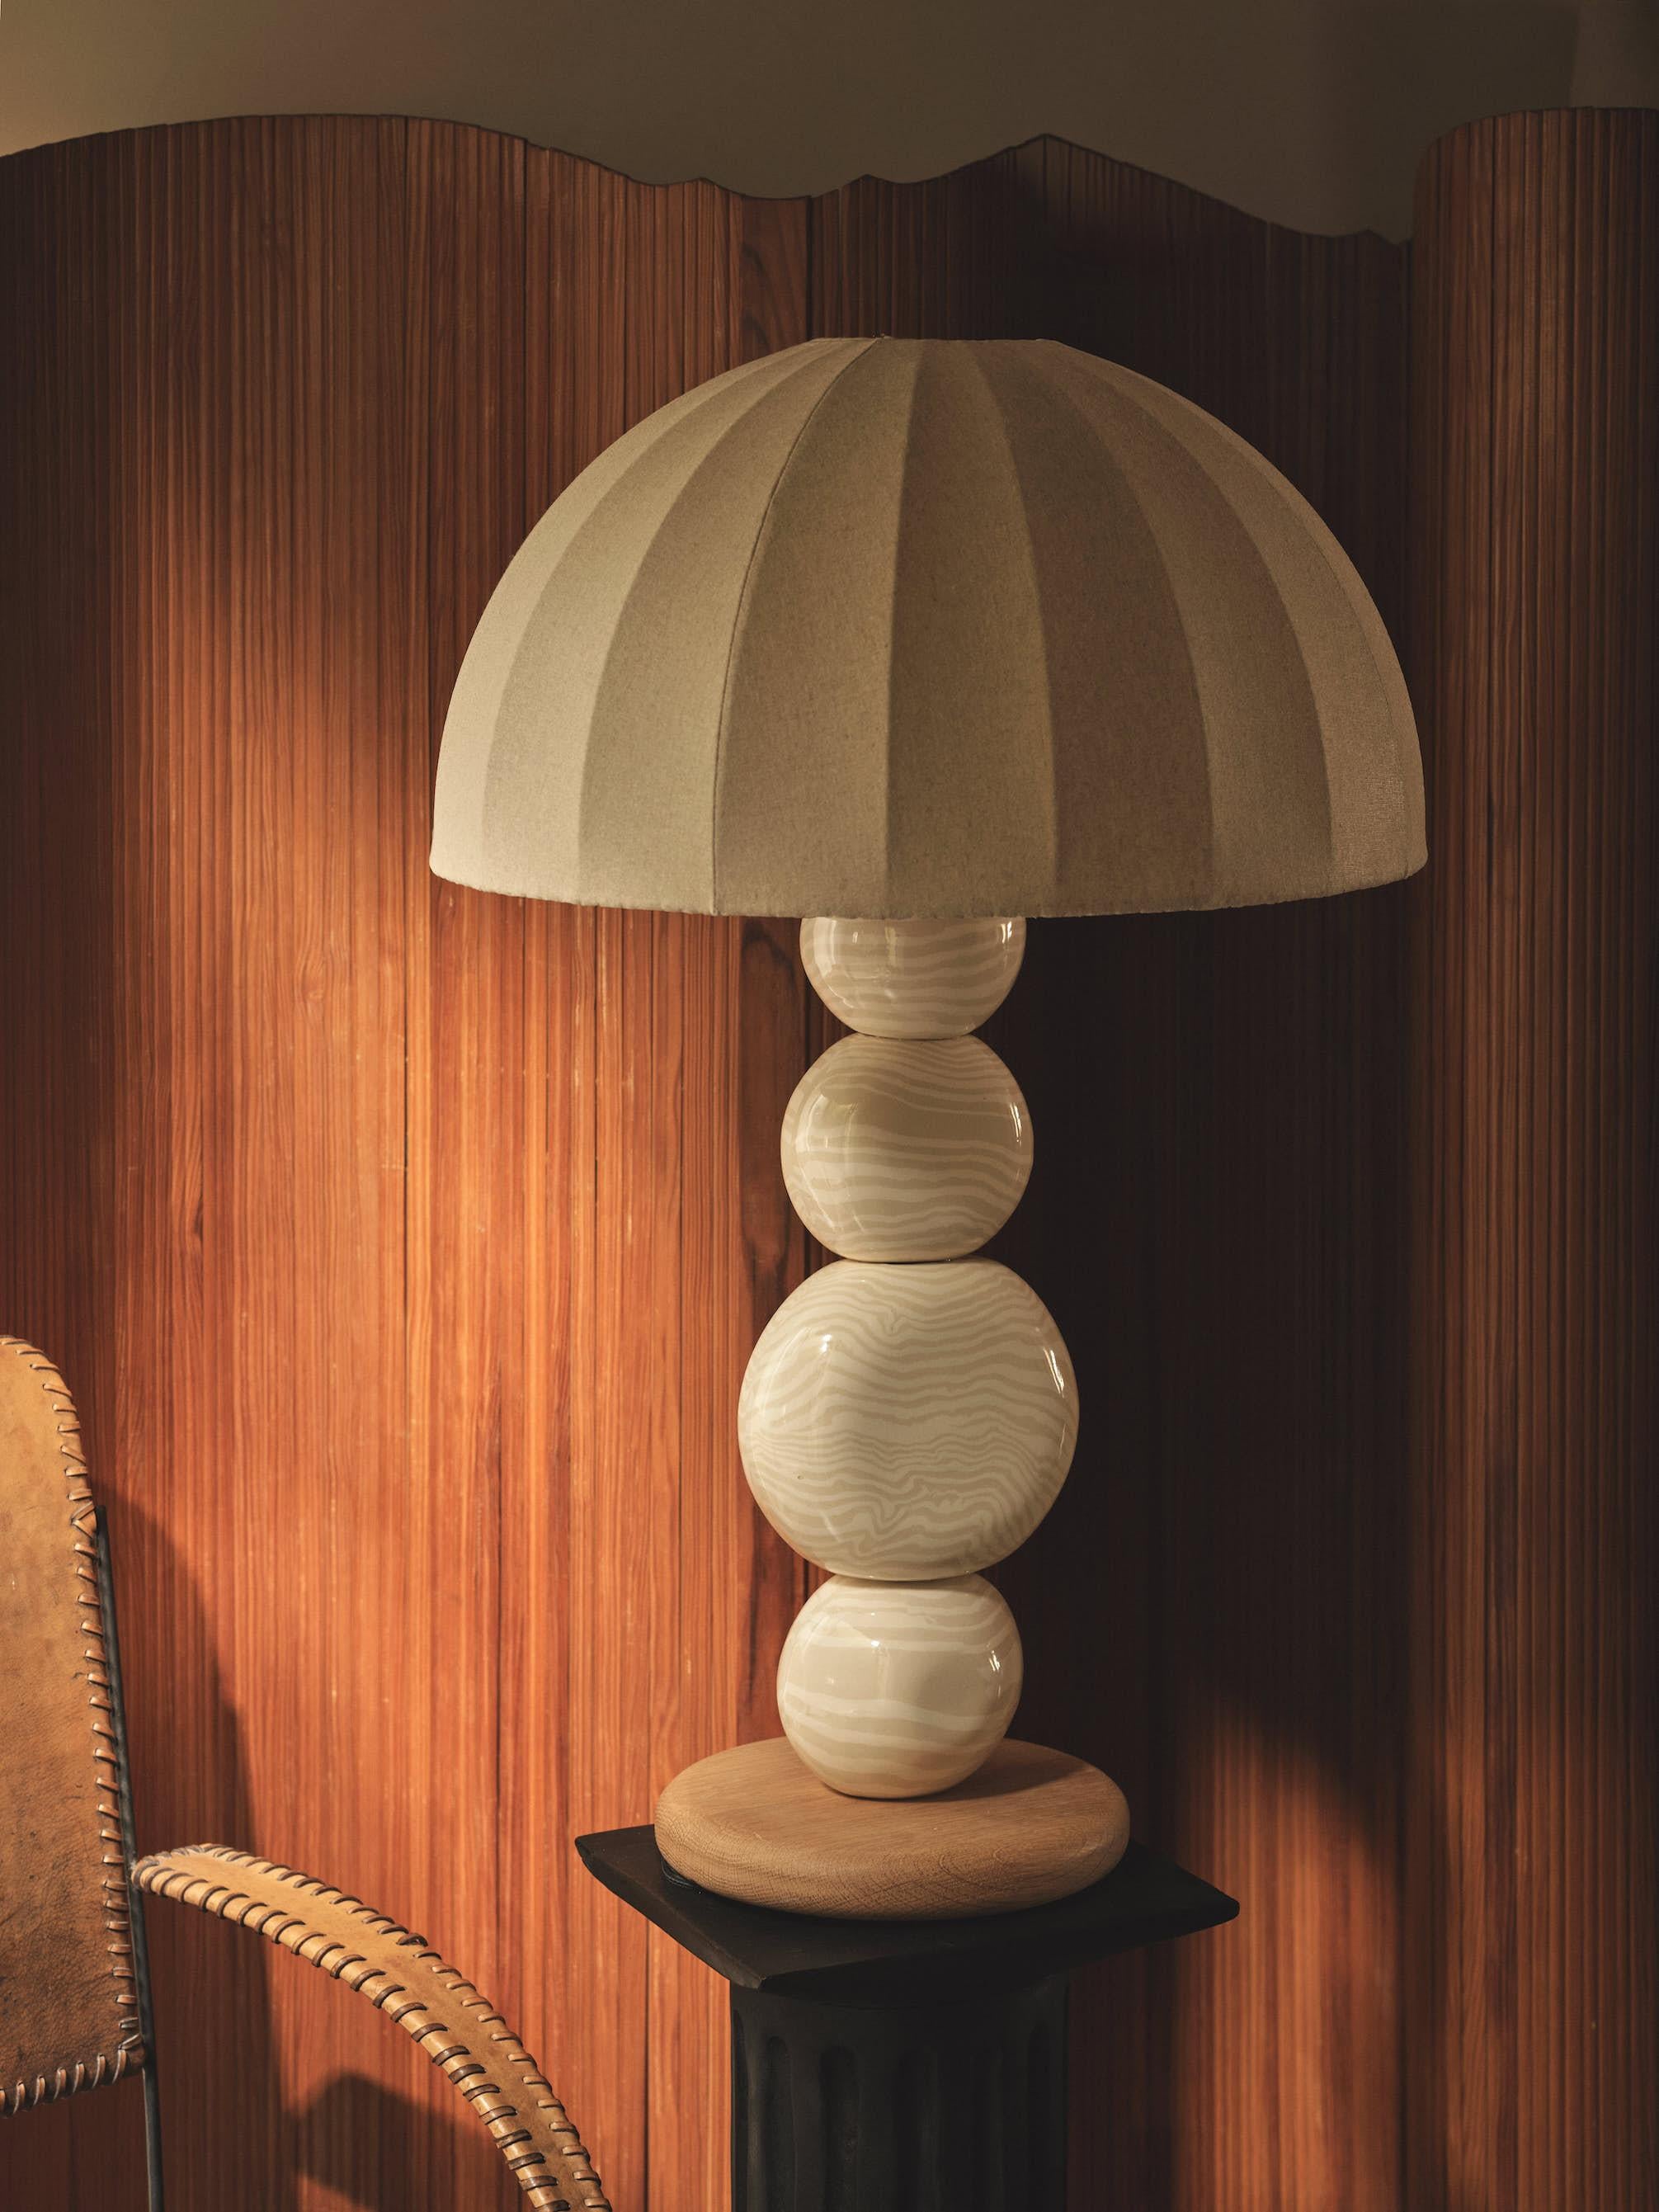 British Henry Holland Studio Handmade Oatmeal and White Ceramic Sphere Table Lamp For Sale